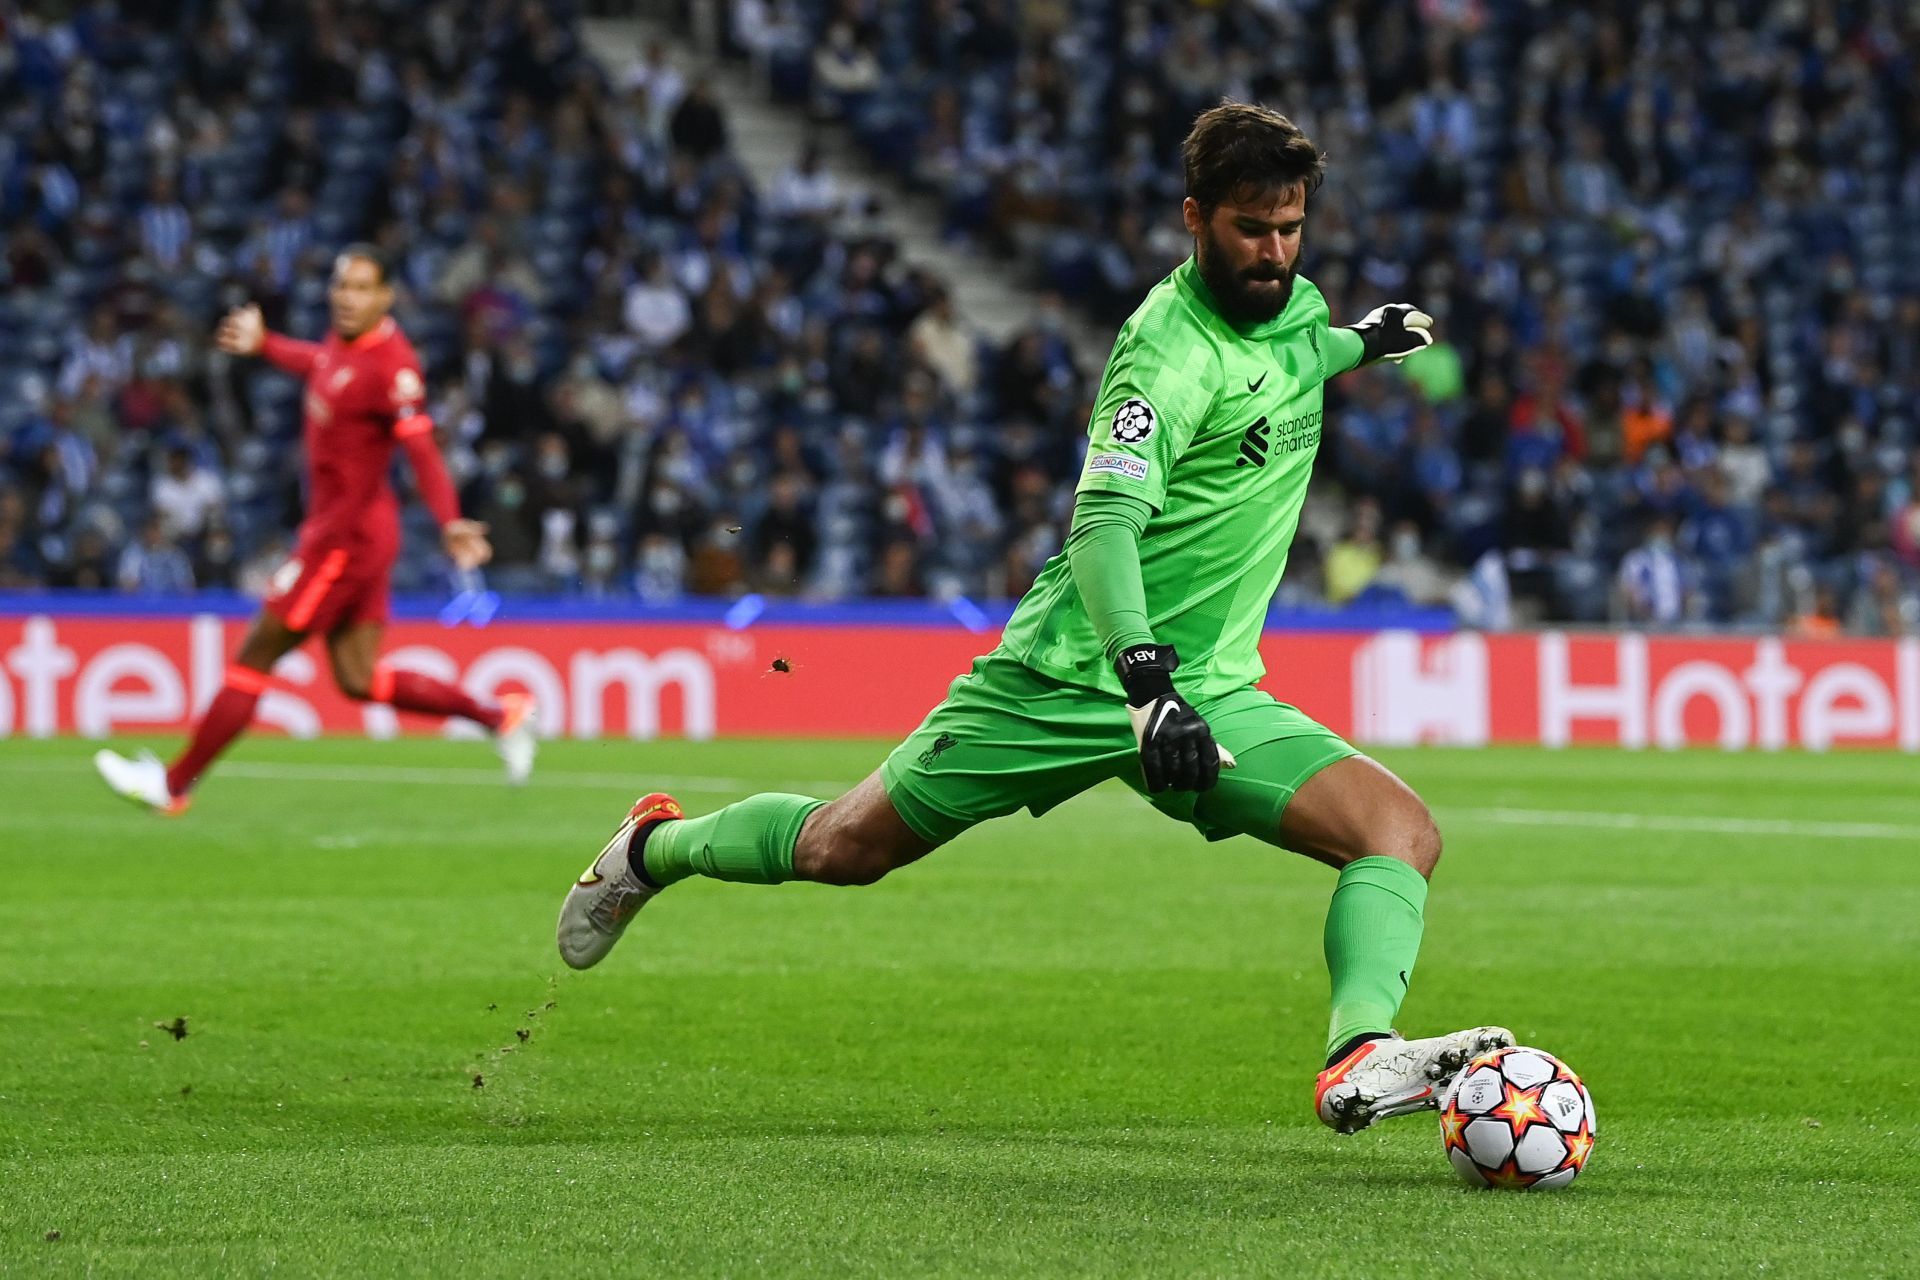 Alisson has put in consistent performances between the sticks for Liverpool.